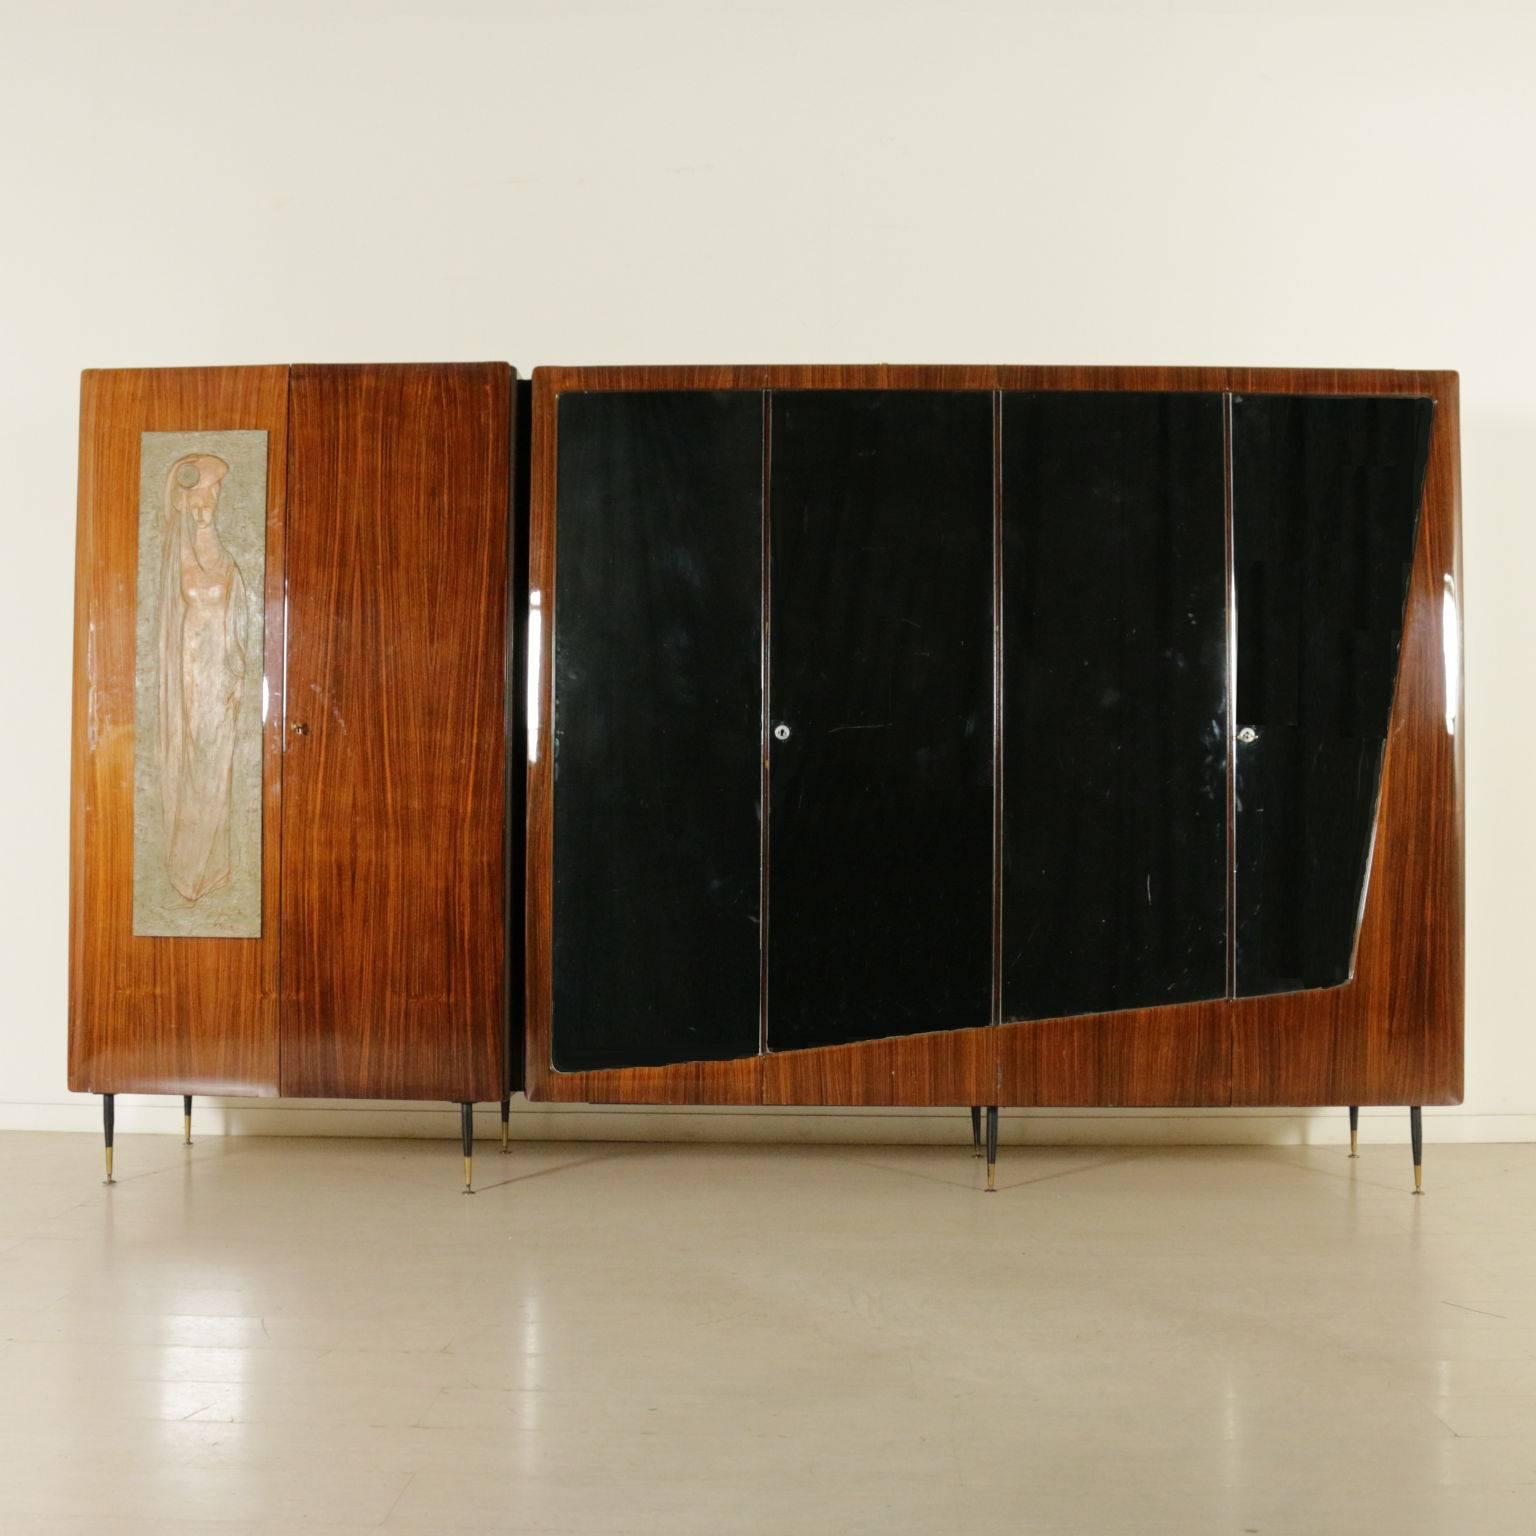 A wardrobe, rosewood veneer with mirrors, decorative wood panel, metal legs with brass ferrules. Manufactured in Italy, 1950s-1960s.